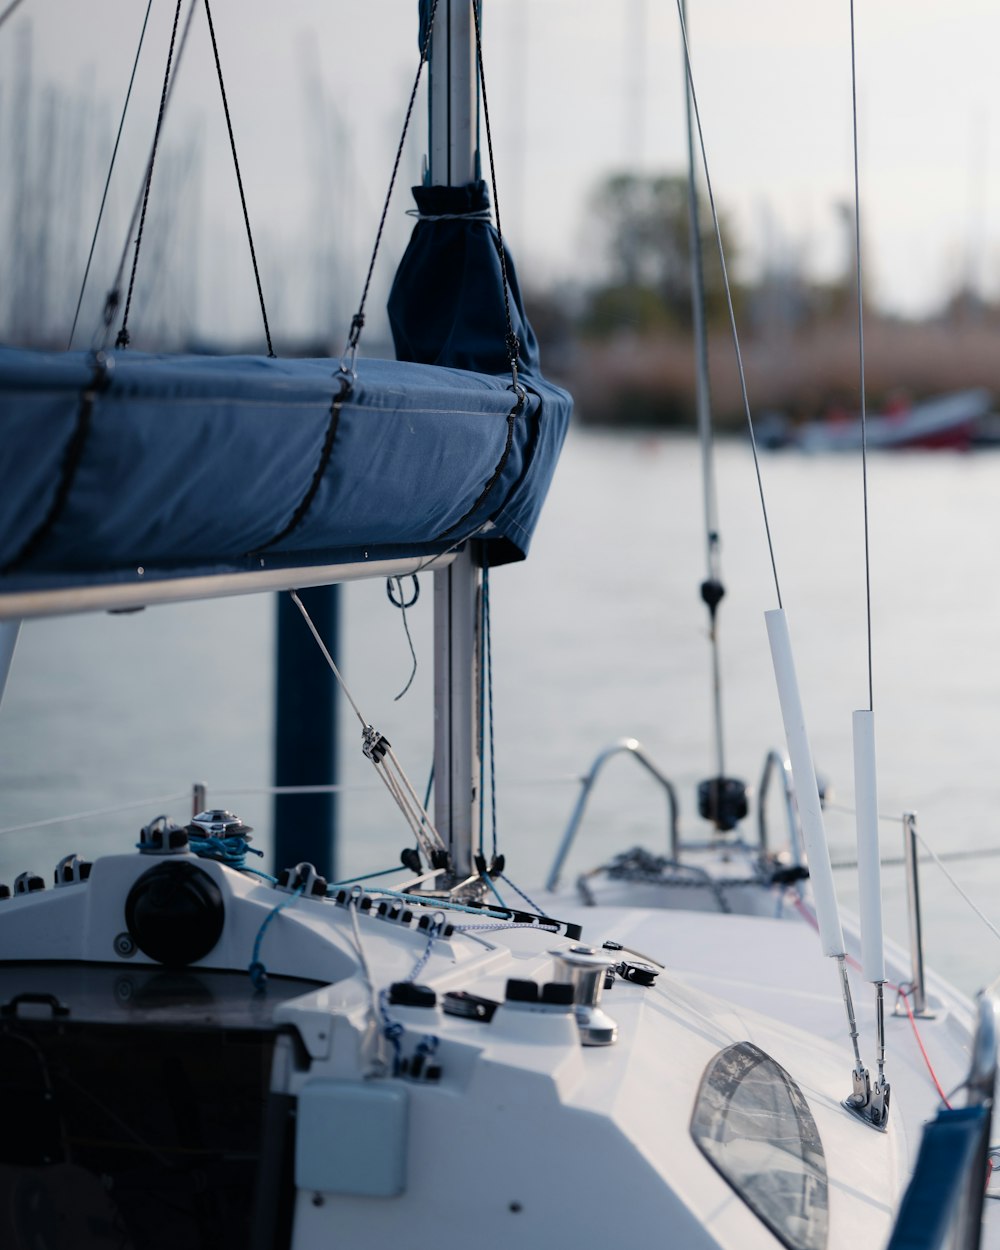 the front of a sailboat in the water